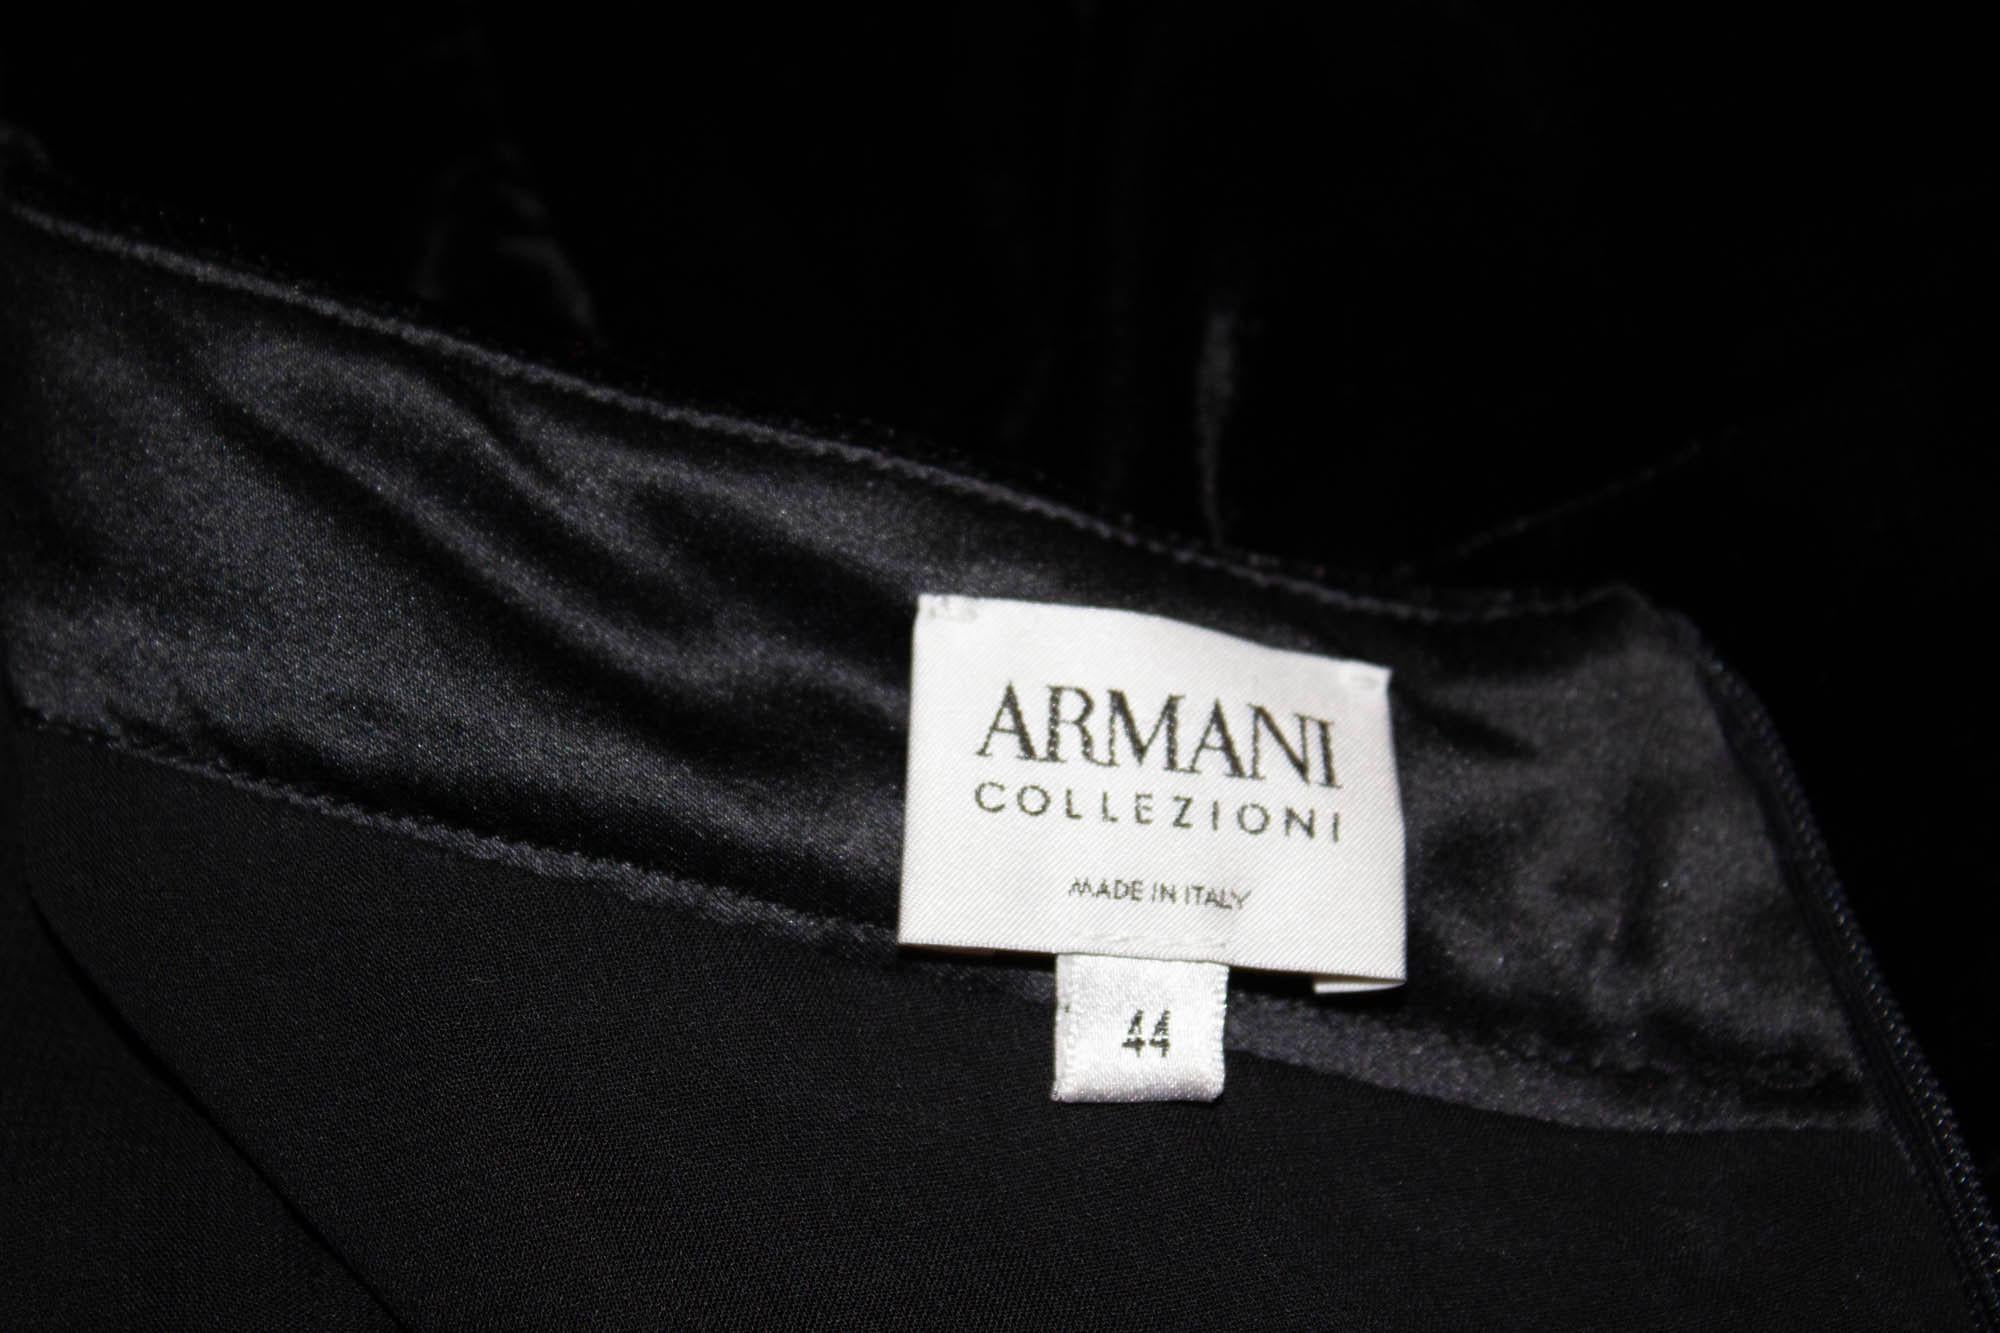 A stunning black velvet cocktail dress by Giorgio Armani, Armani Collezionni line. The dress has a v neckline with a crossover front, puff sleaves and A line skirt area. It is fully lined with a back central zip. Size Eu Italian 44, Measurements: